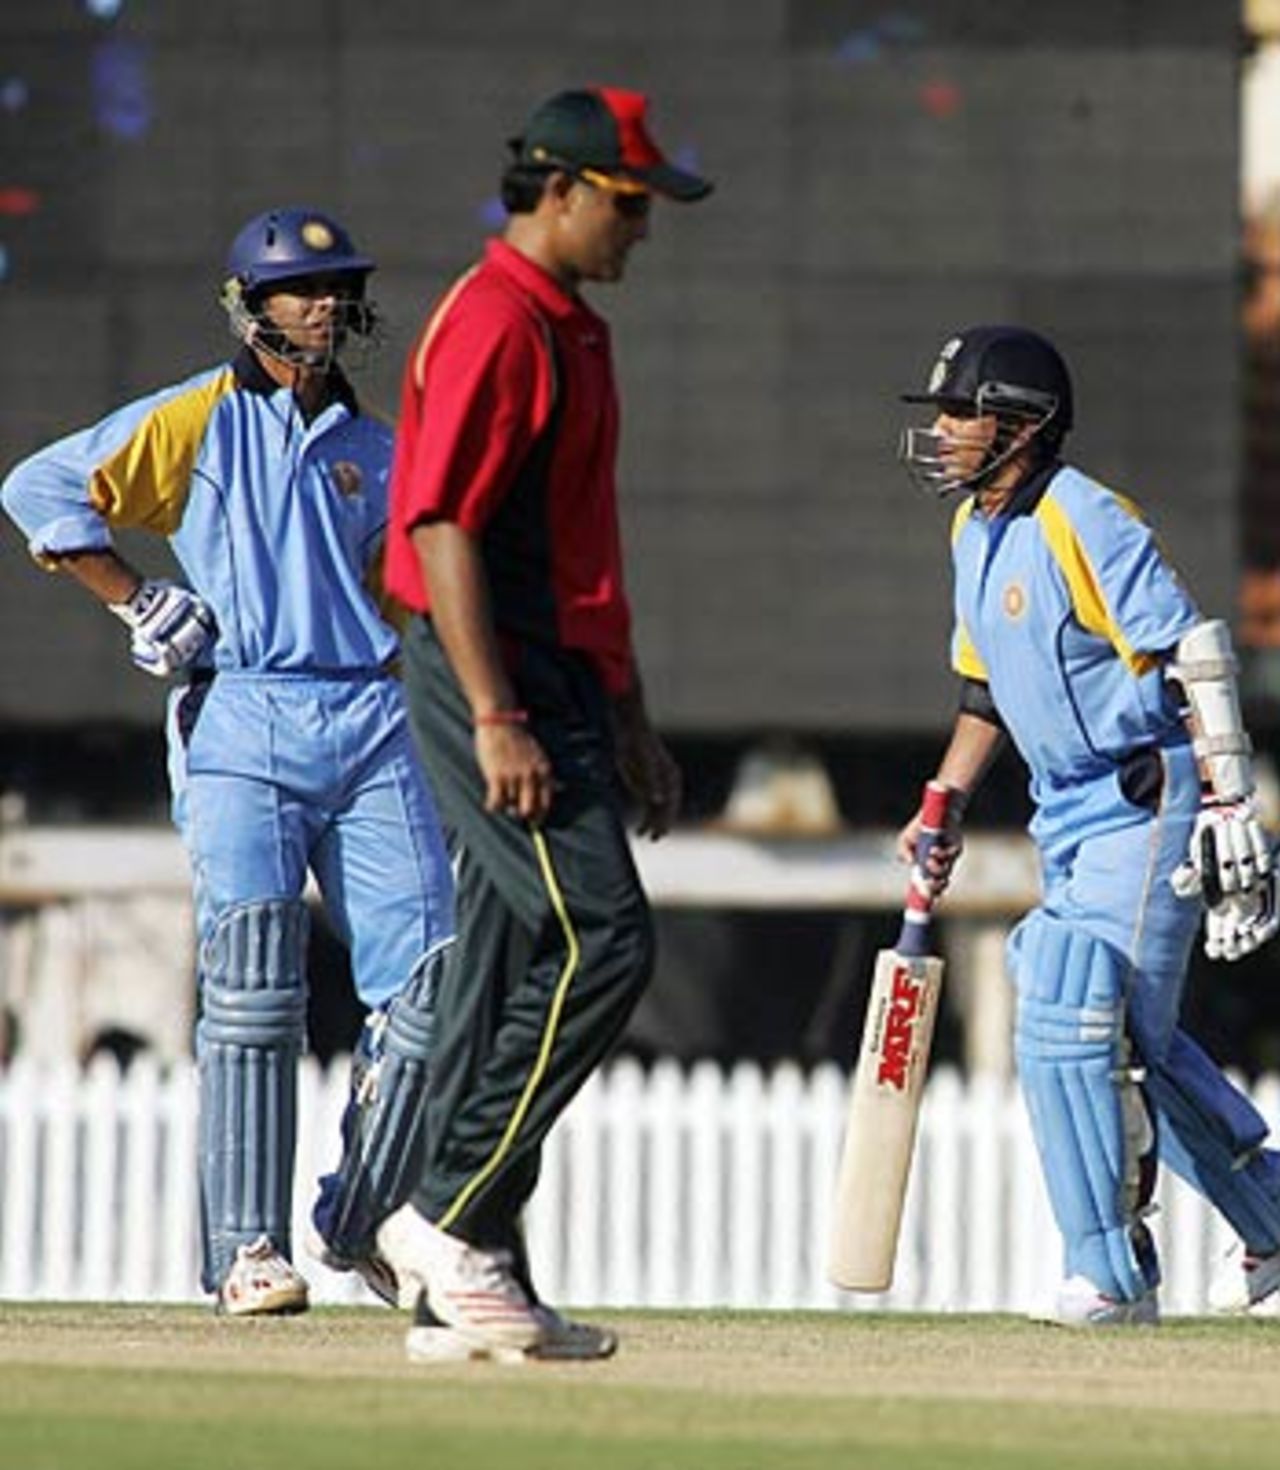 Sachin Tendulkar and Rahul Dravid have a chat as Sourav Ganguly changes his fielding position, India Blue v India Green, Challenger Series, Chennai, October 2, 2006